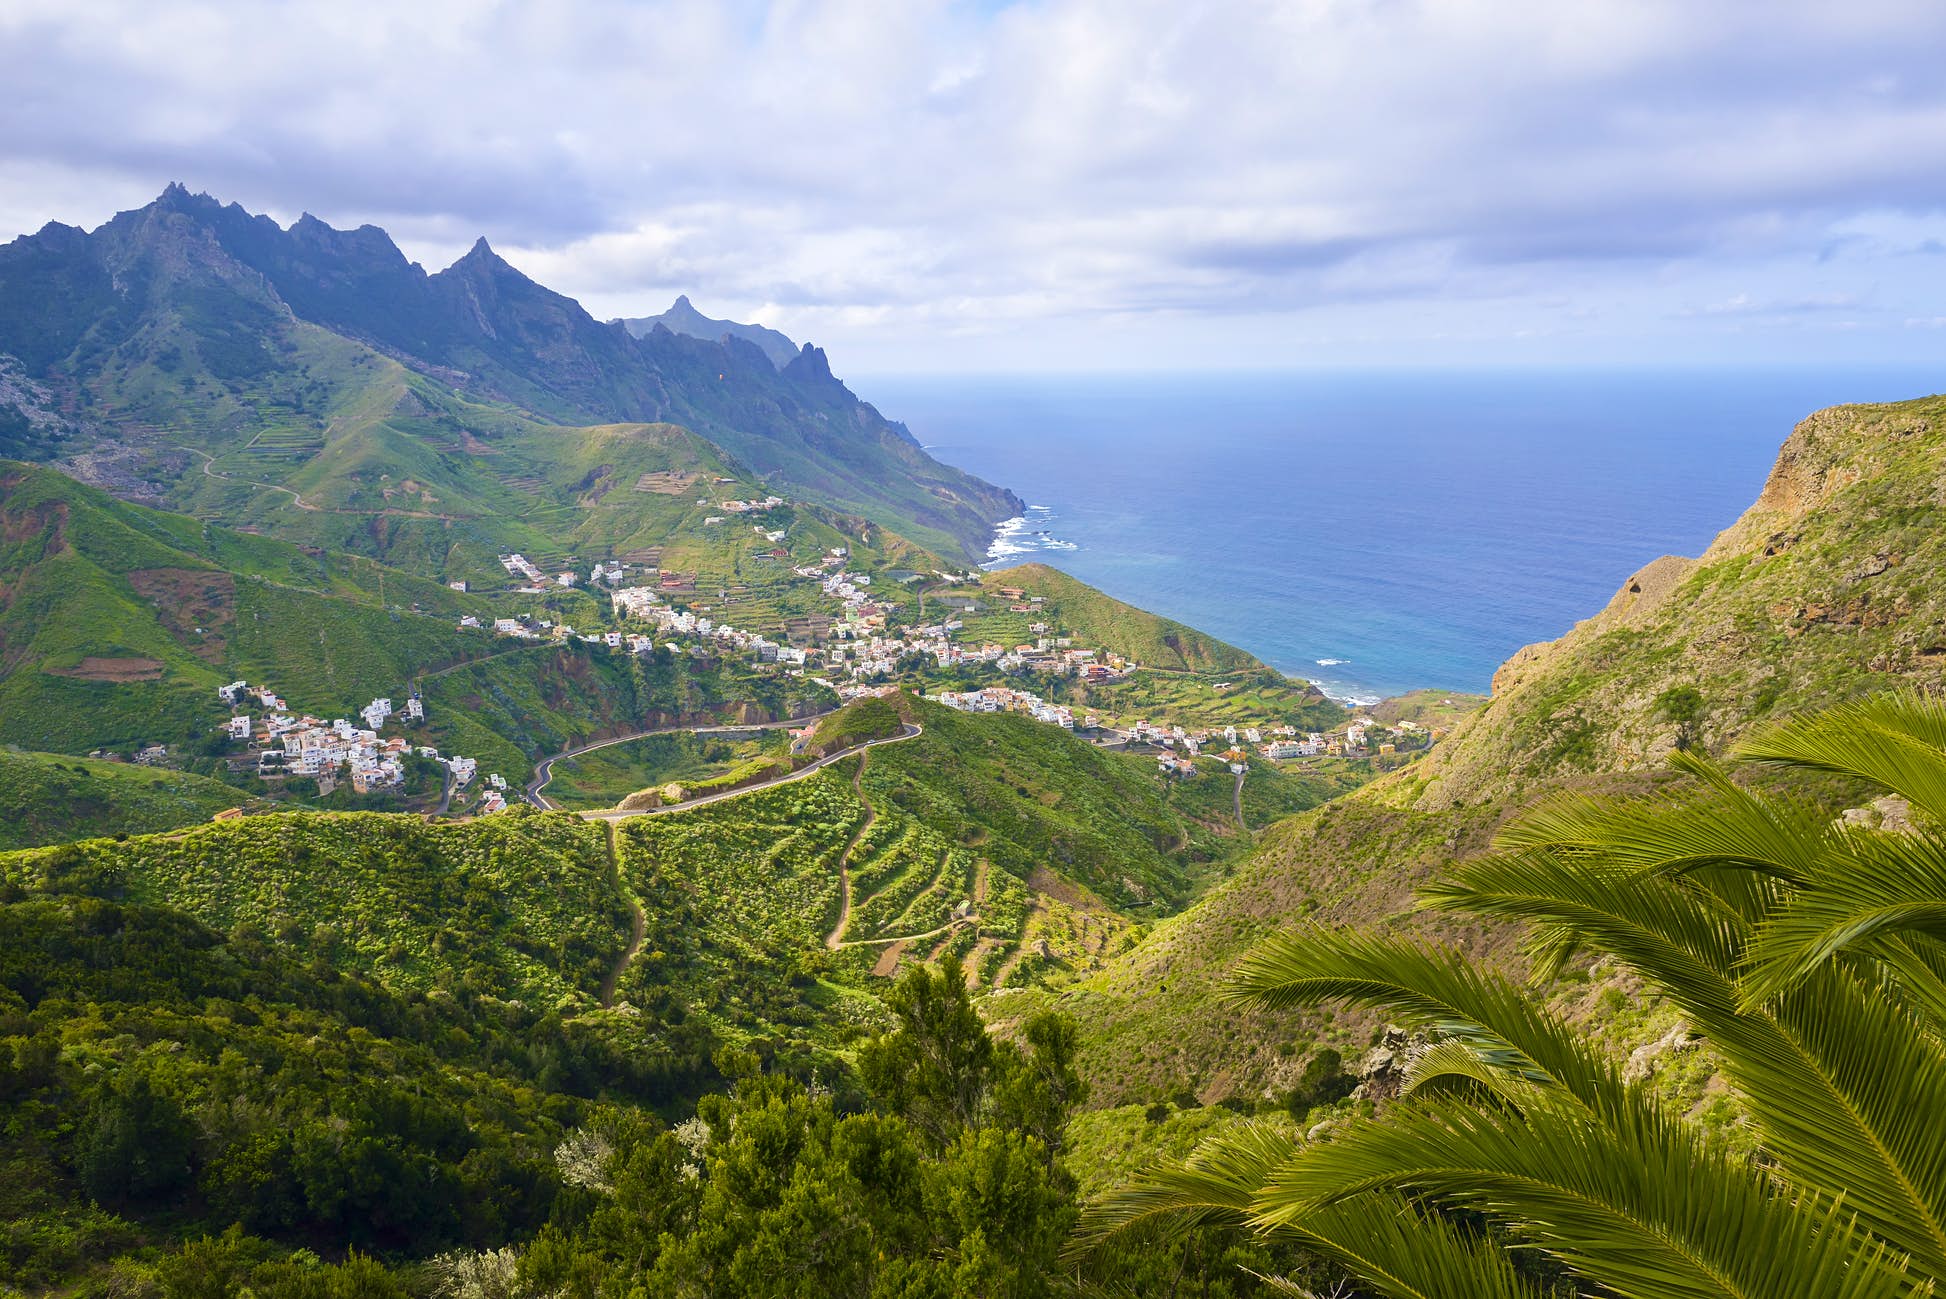 Anaga Mountains, Taganana, Tenerife ©Westend61/Getty Images